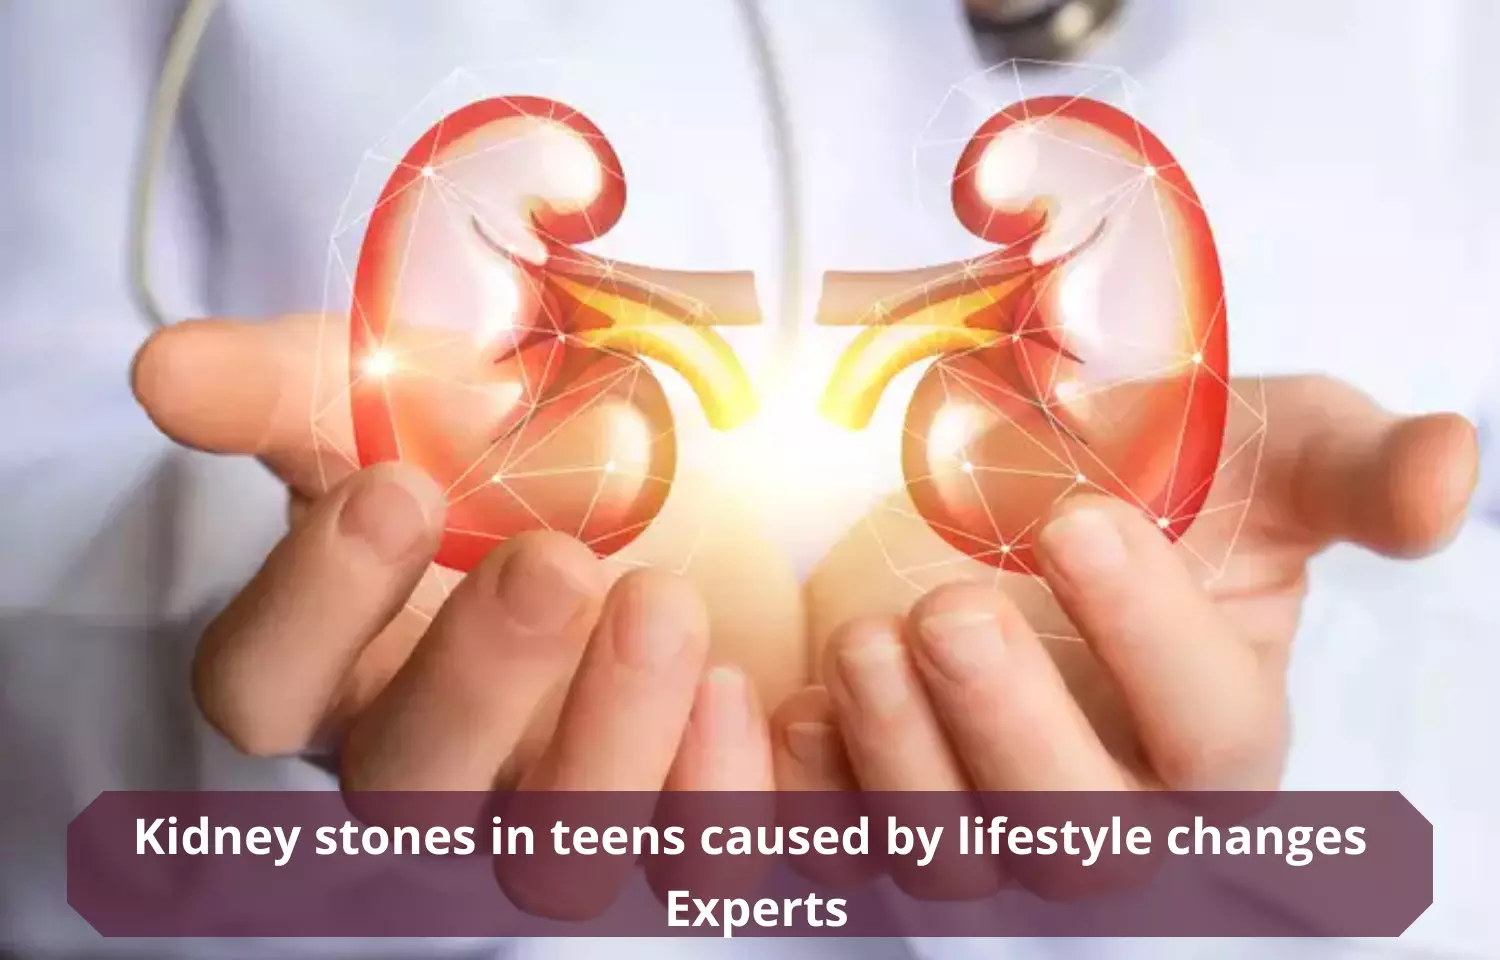 Kidney stones in teens caused by lifestyle changes: Experts